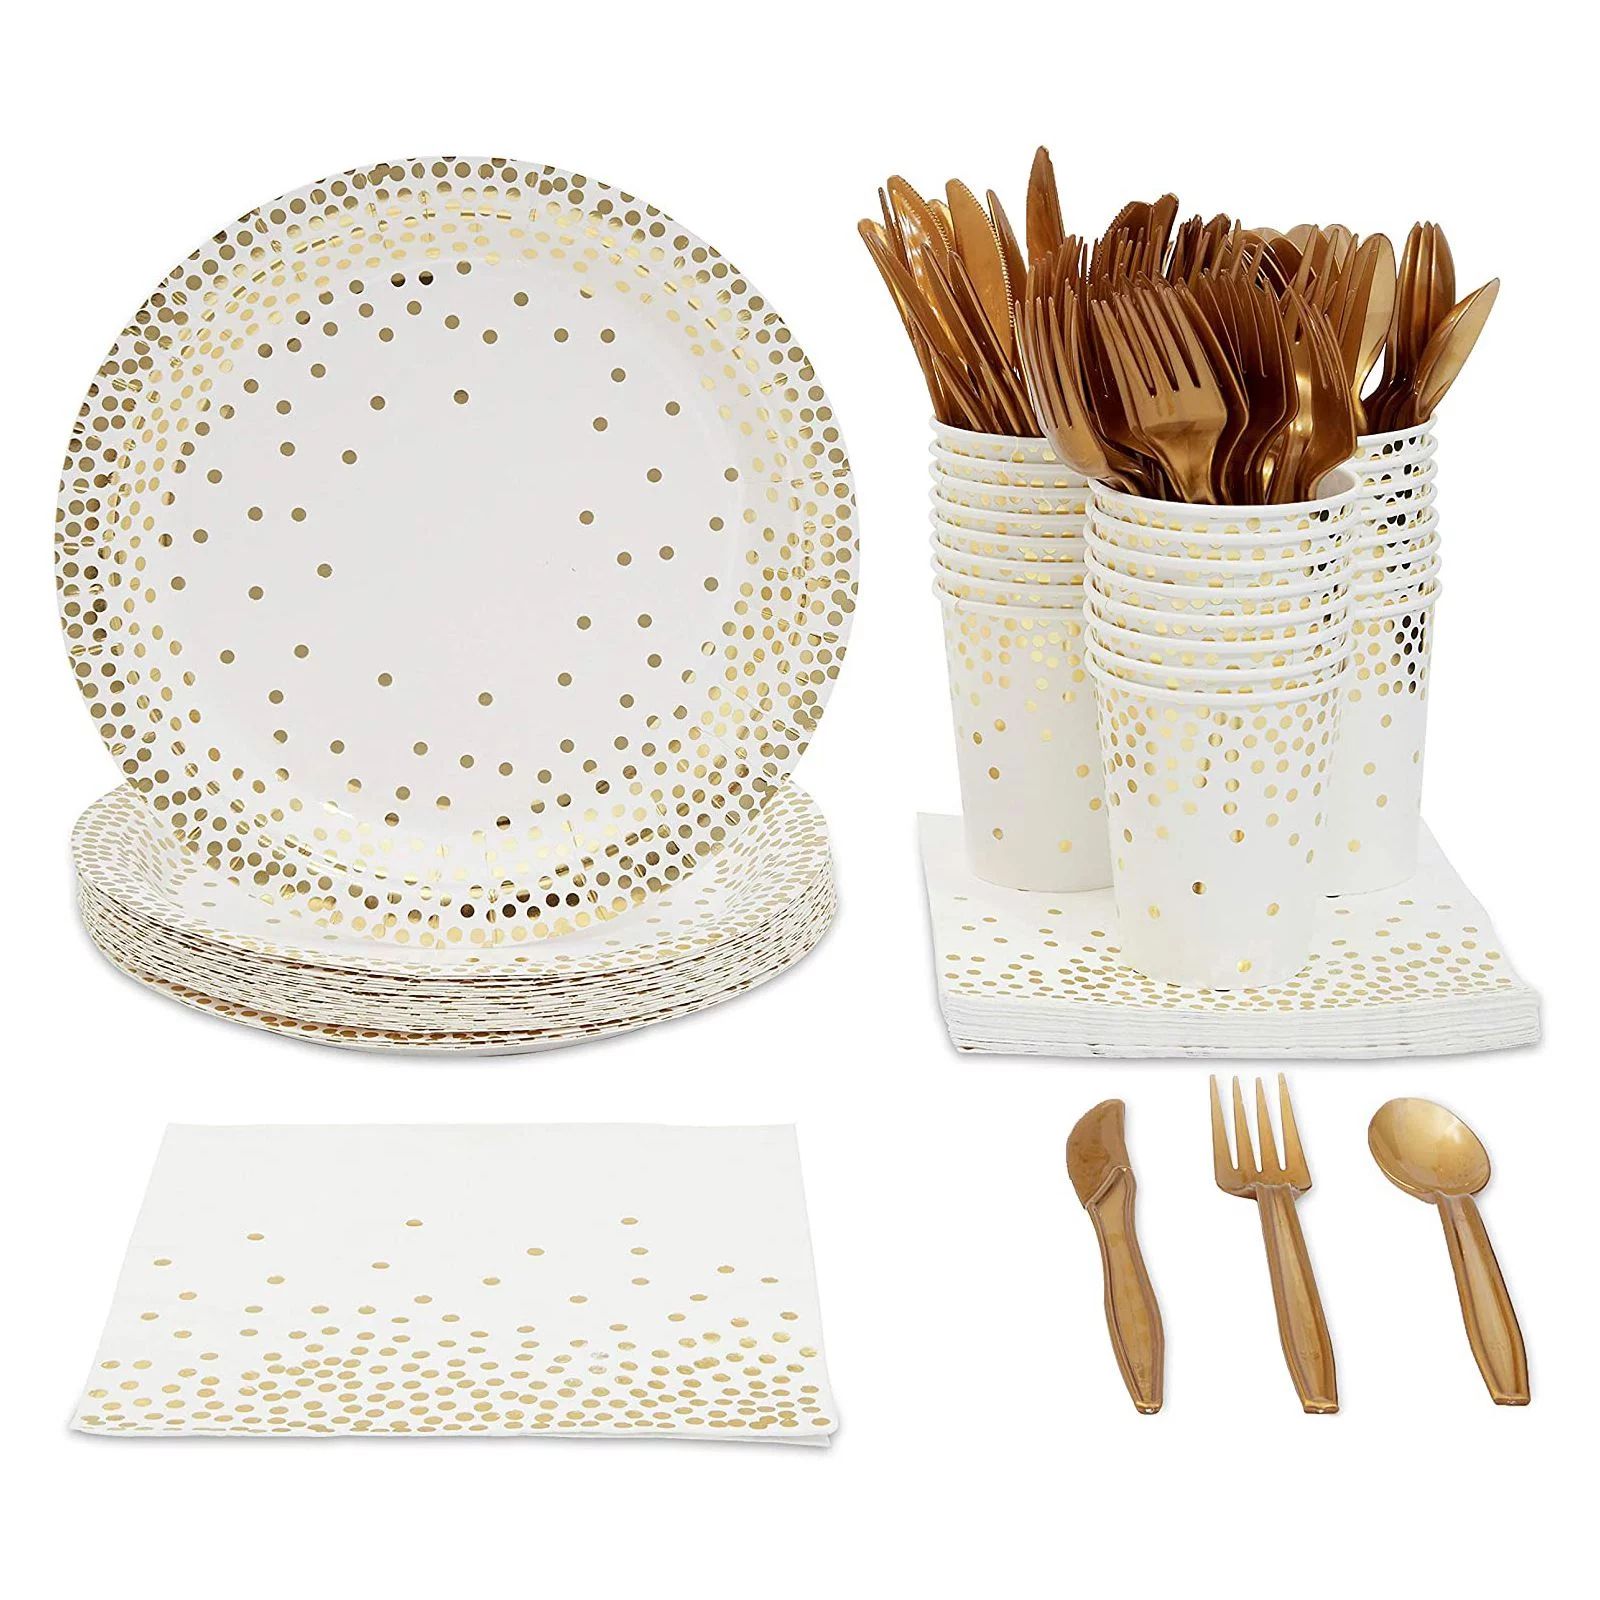 144 Piece Polka Dotted Gold Paper Plates, Napkins, Cups, Cutlery for Party Supplies, Serves 24 - ... | Walmart (US)